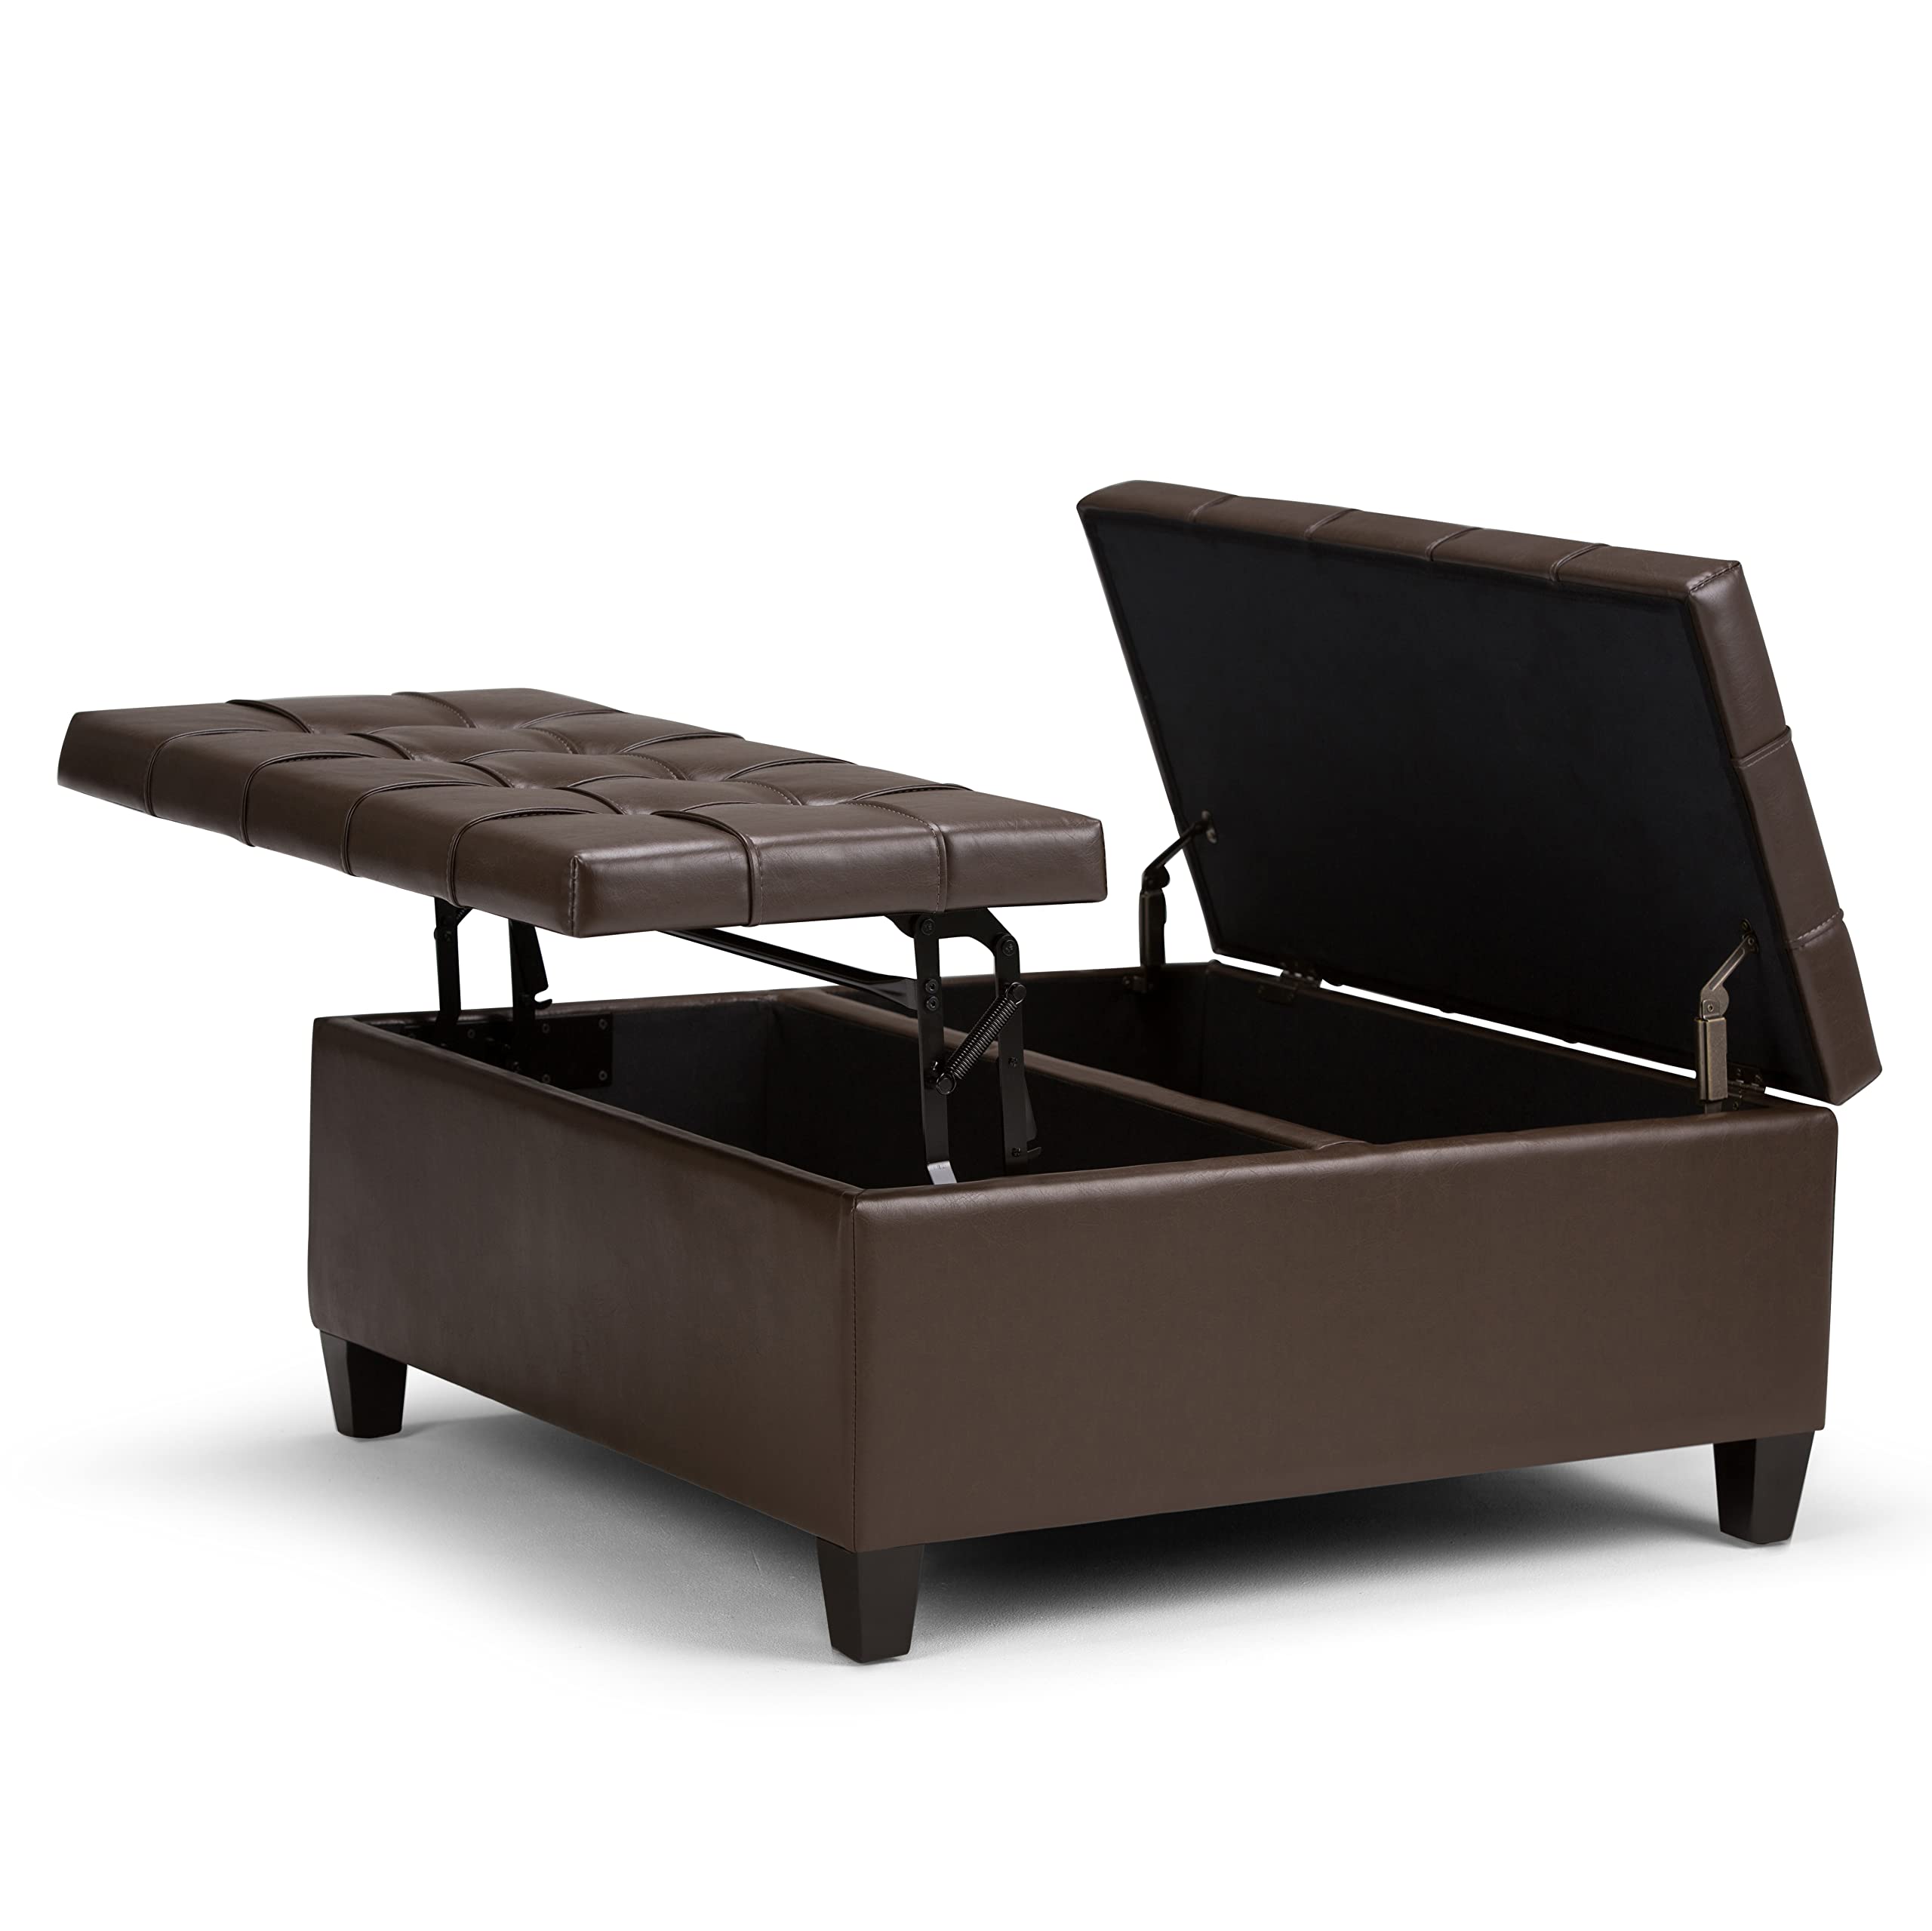 SIMPLIHOME Harrison 36 inch Wide Square Coffee Table Lift Top Storage Ottoman, Cocktail Footrest Stool in Upholstered Chocolate 